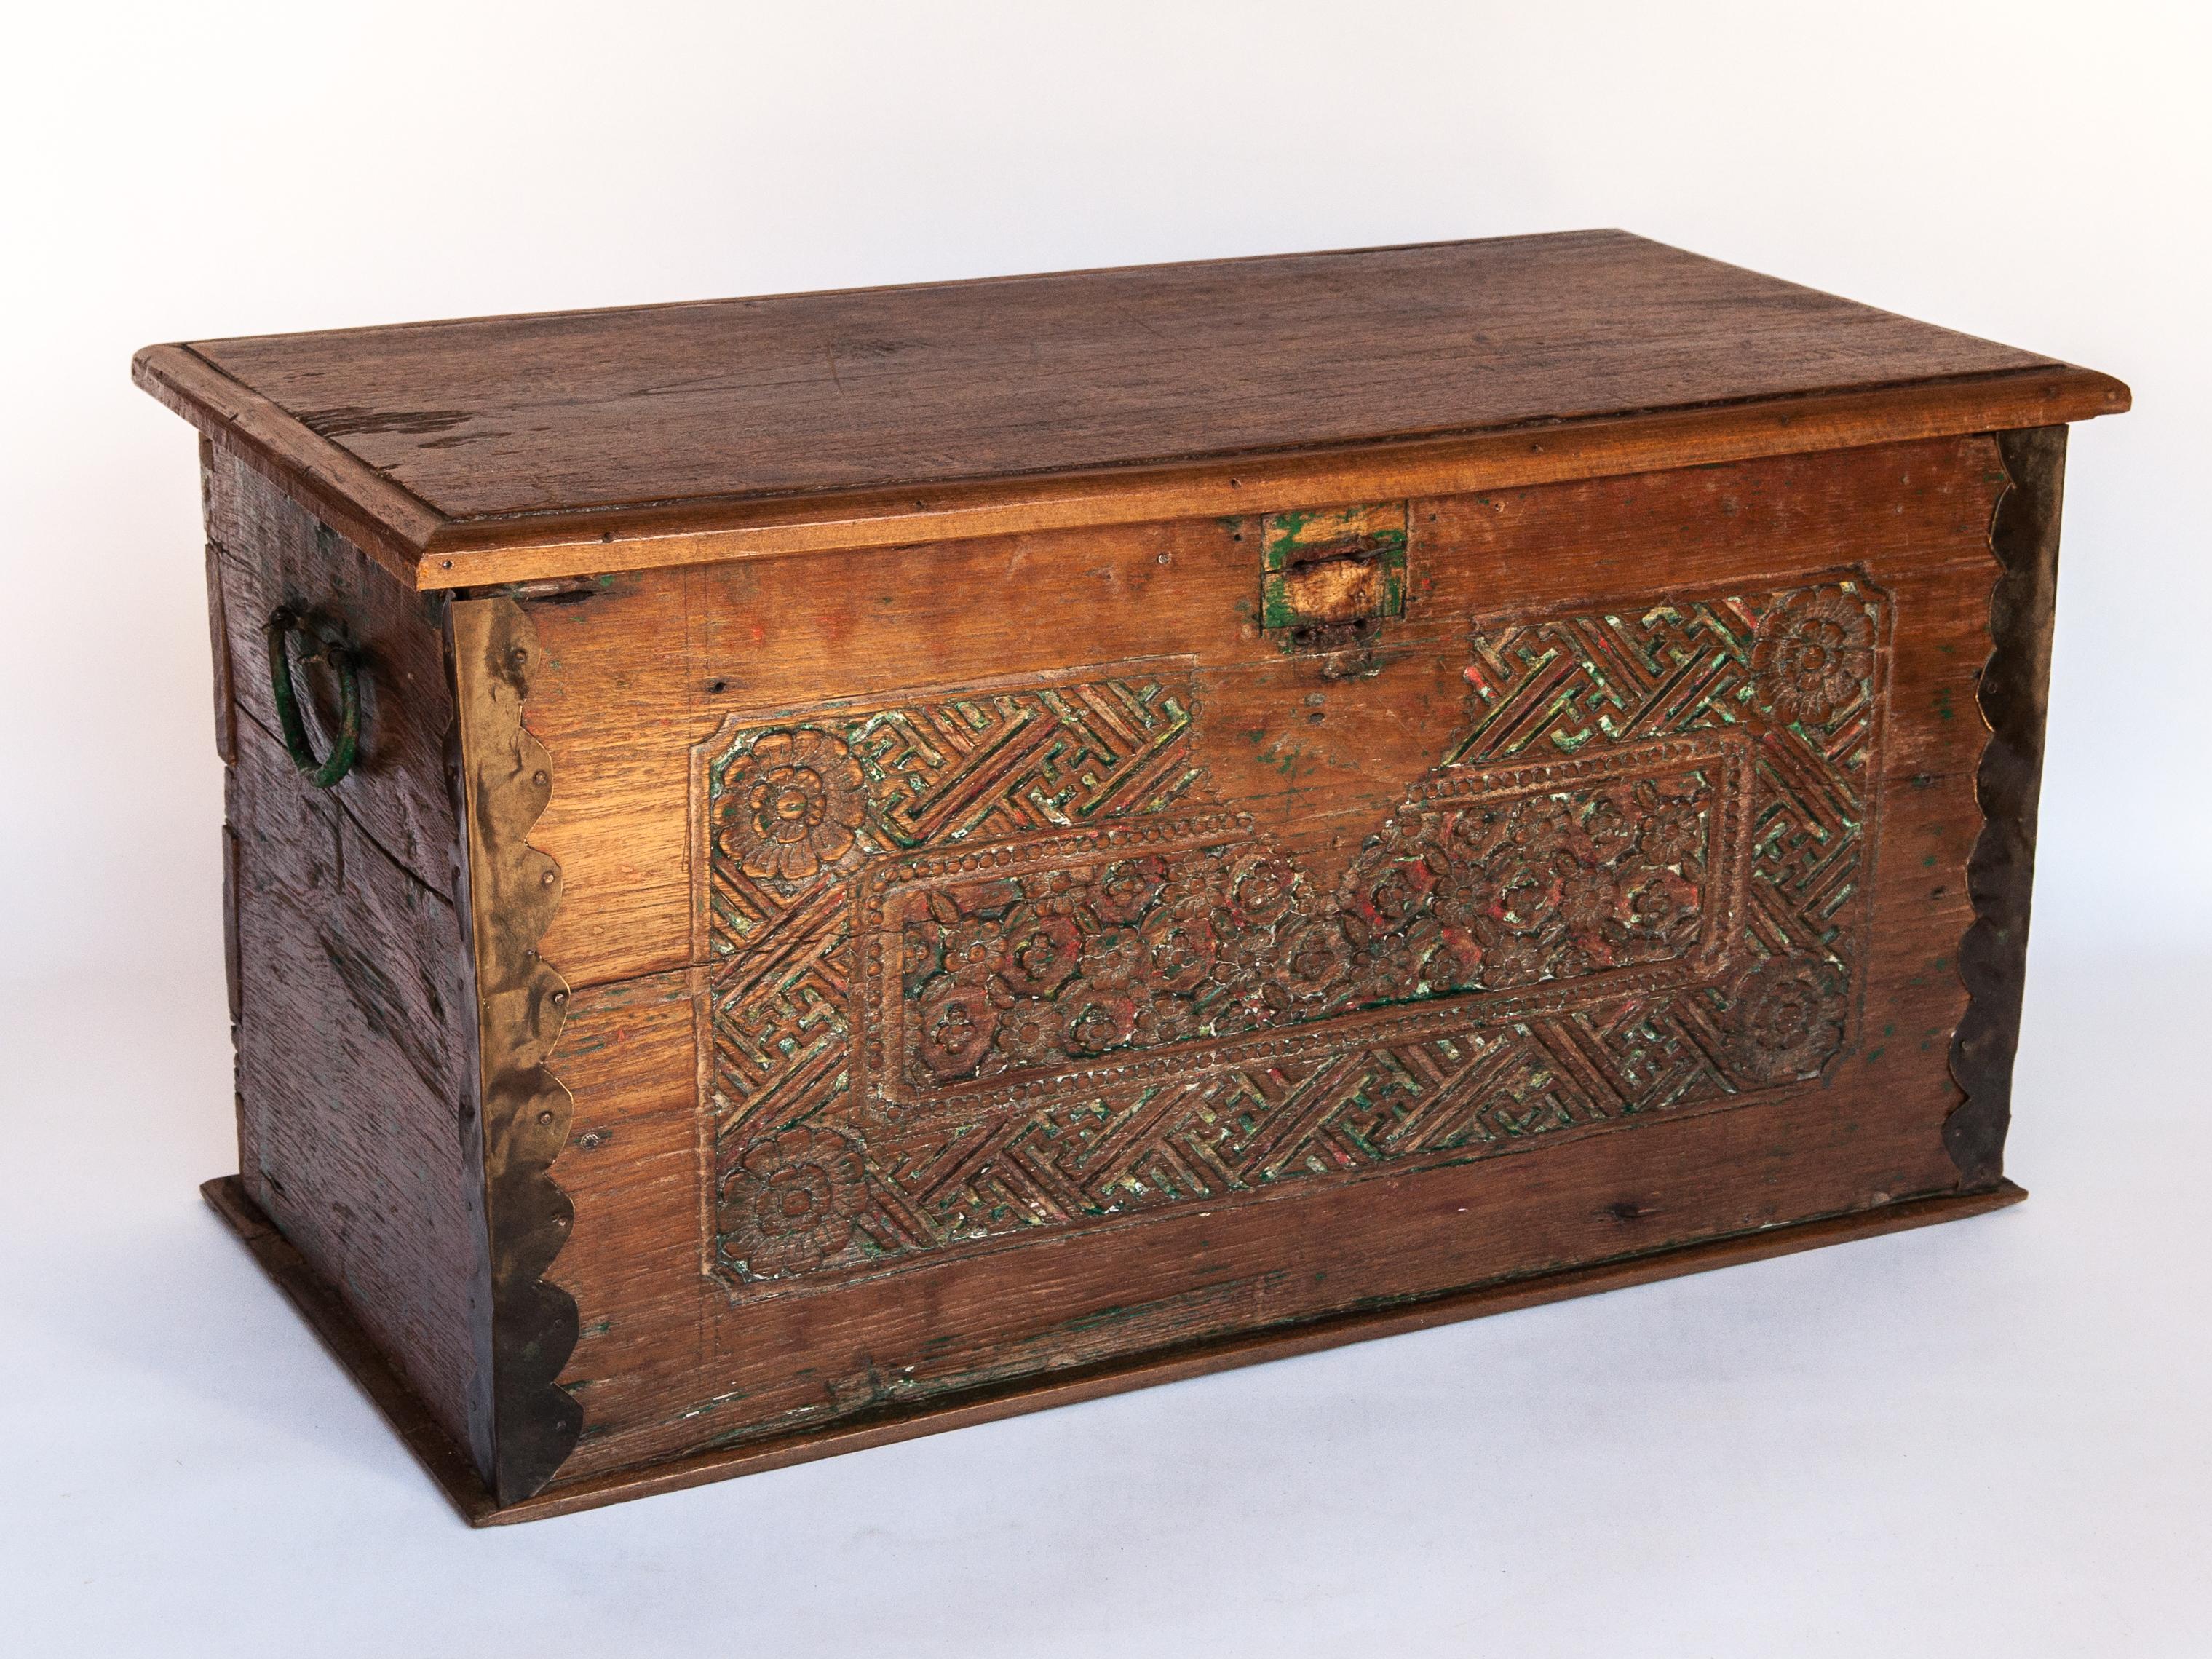 Vintage teak storage chest with carved design from Java, mid-20th century.
This old teak wood chest comes from central Java, where it would have been used to store textiles and other valuables in a rural Javanese home. The front panel is carved in